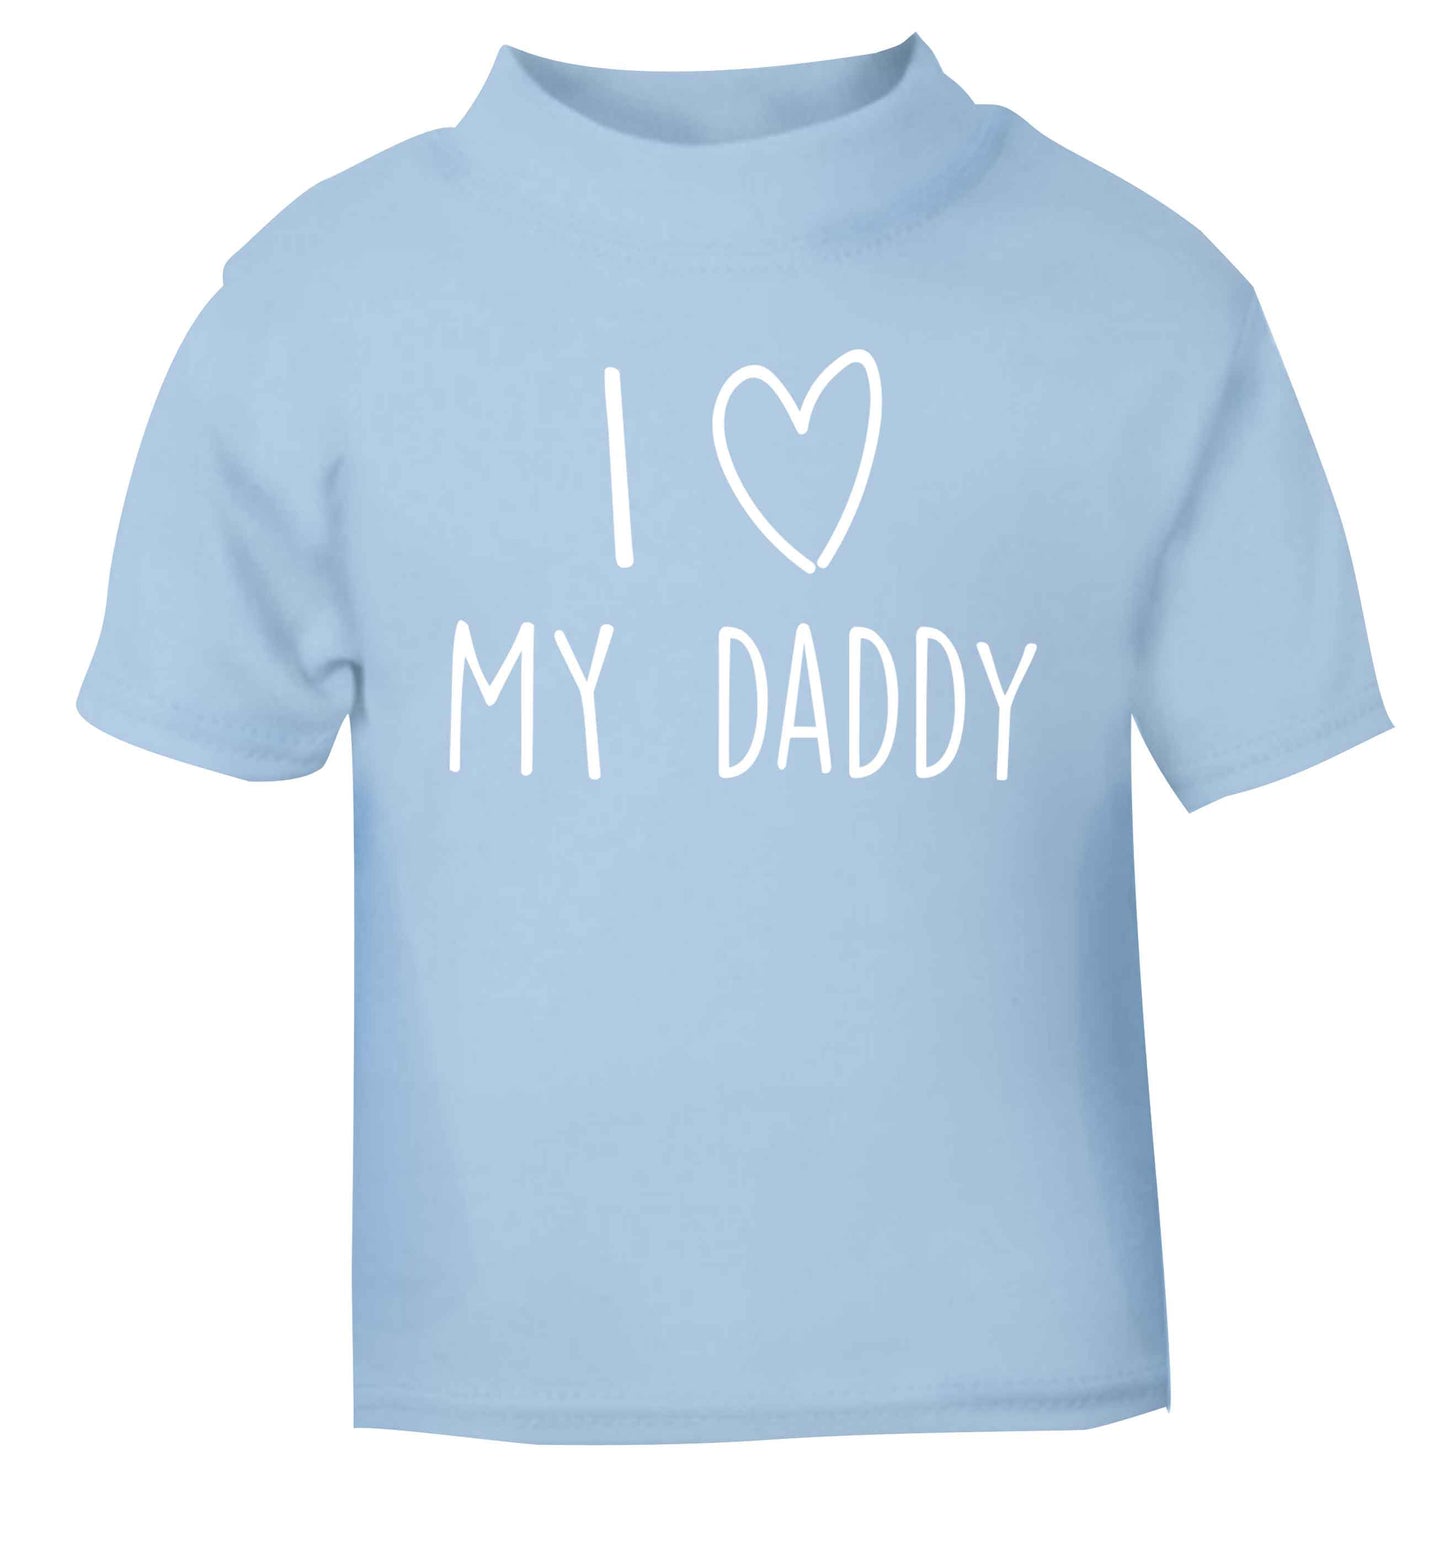 I love my daddy light blue baby toddler Tshirt 2 Years